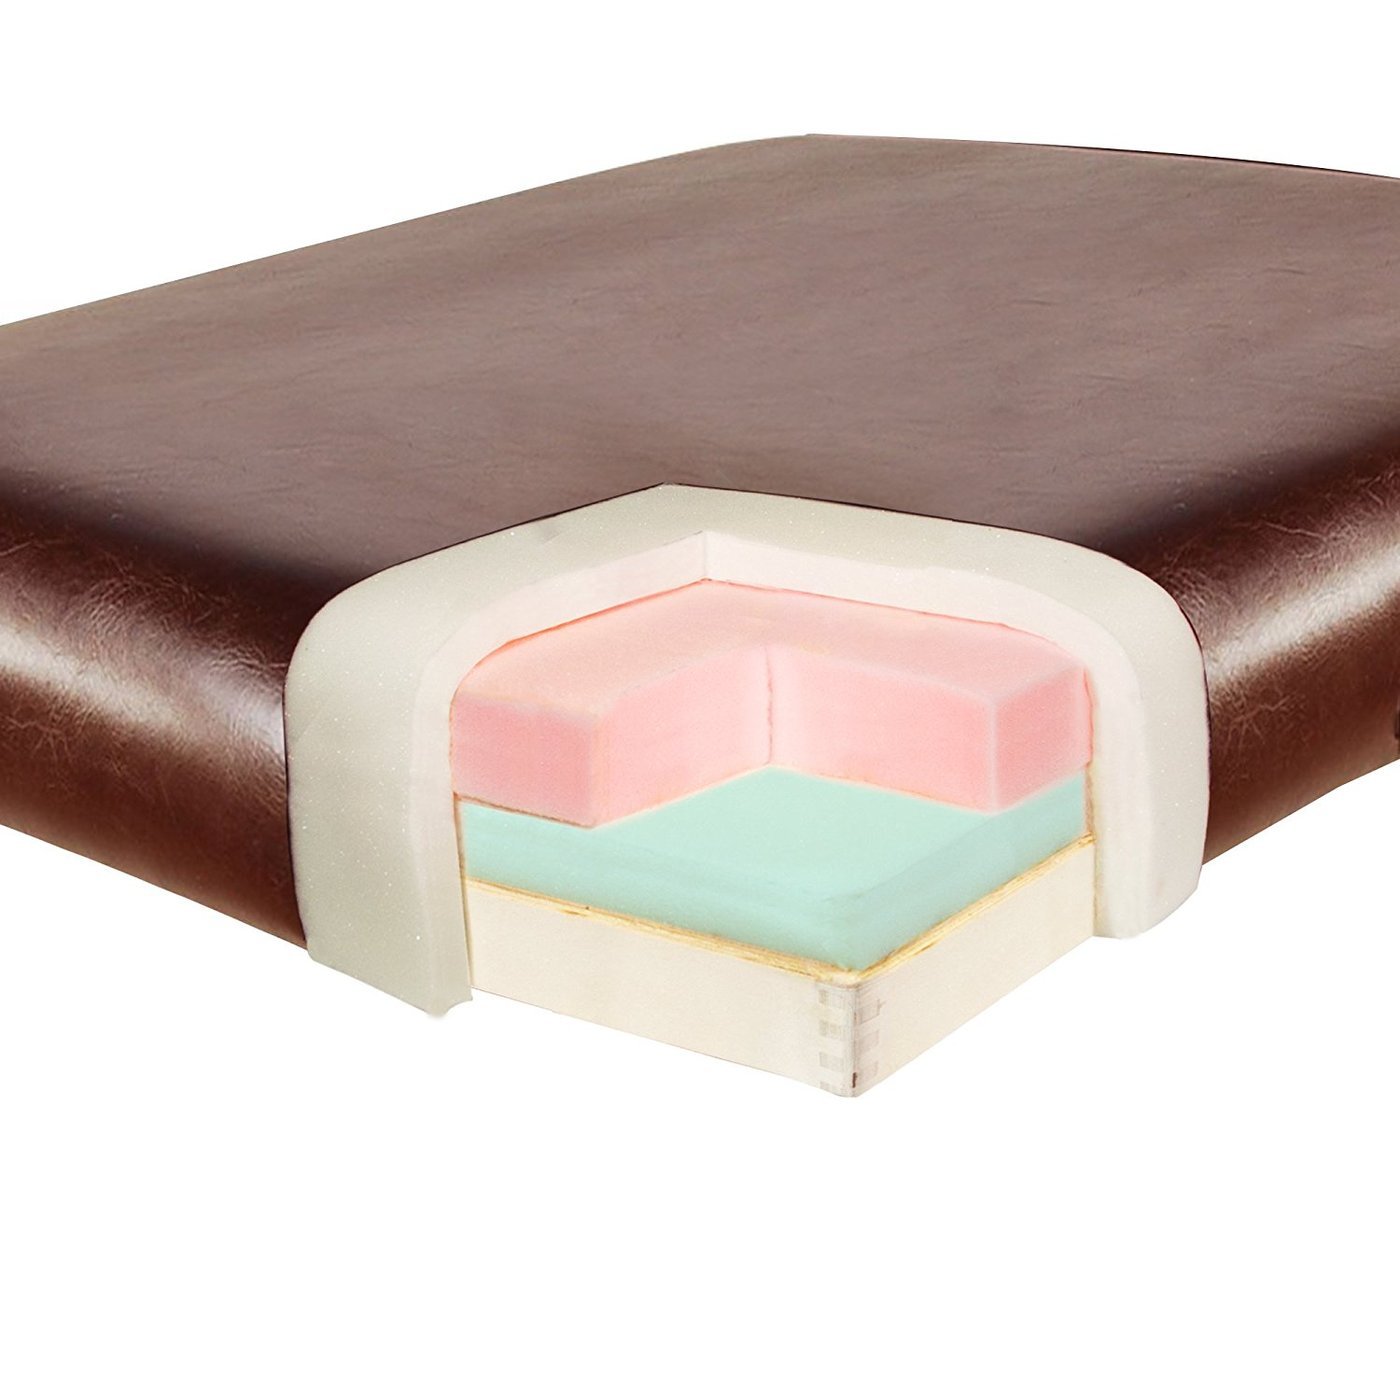 31” Carlyle™ LX Portable Massage Table Package with MEMORY FOAM Layer, Reiki Panels! (Chocolate Italia Color)